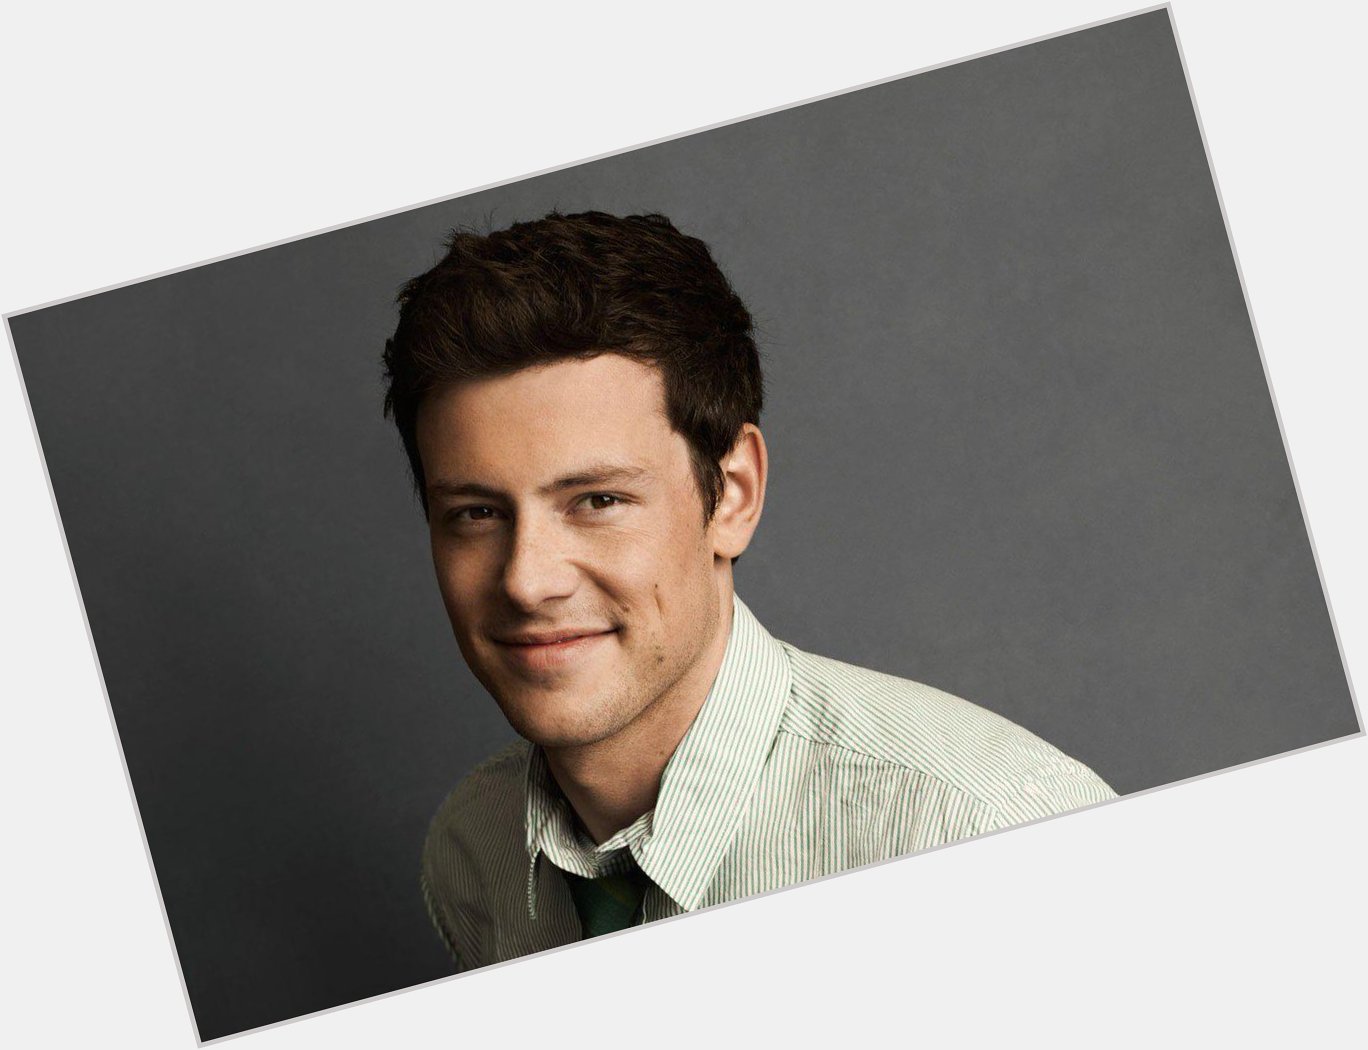 Happy Birthday to Cory Monteith, who would have turned 33 today! 